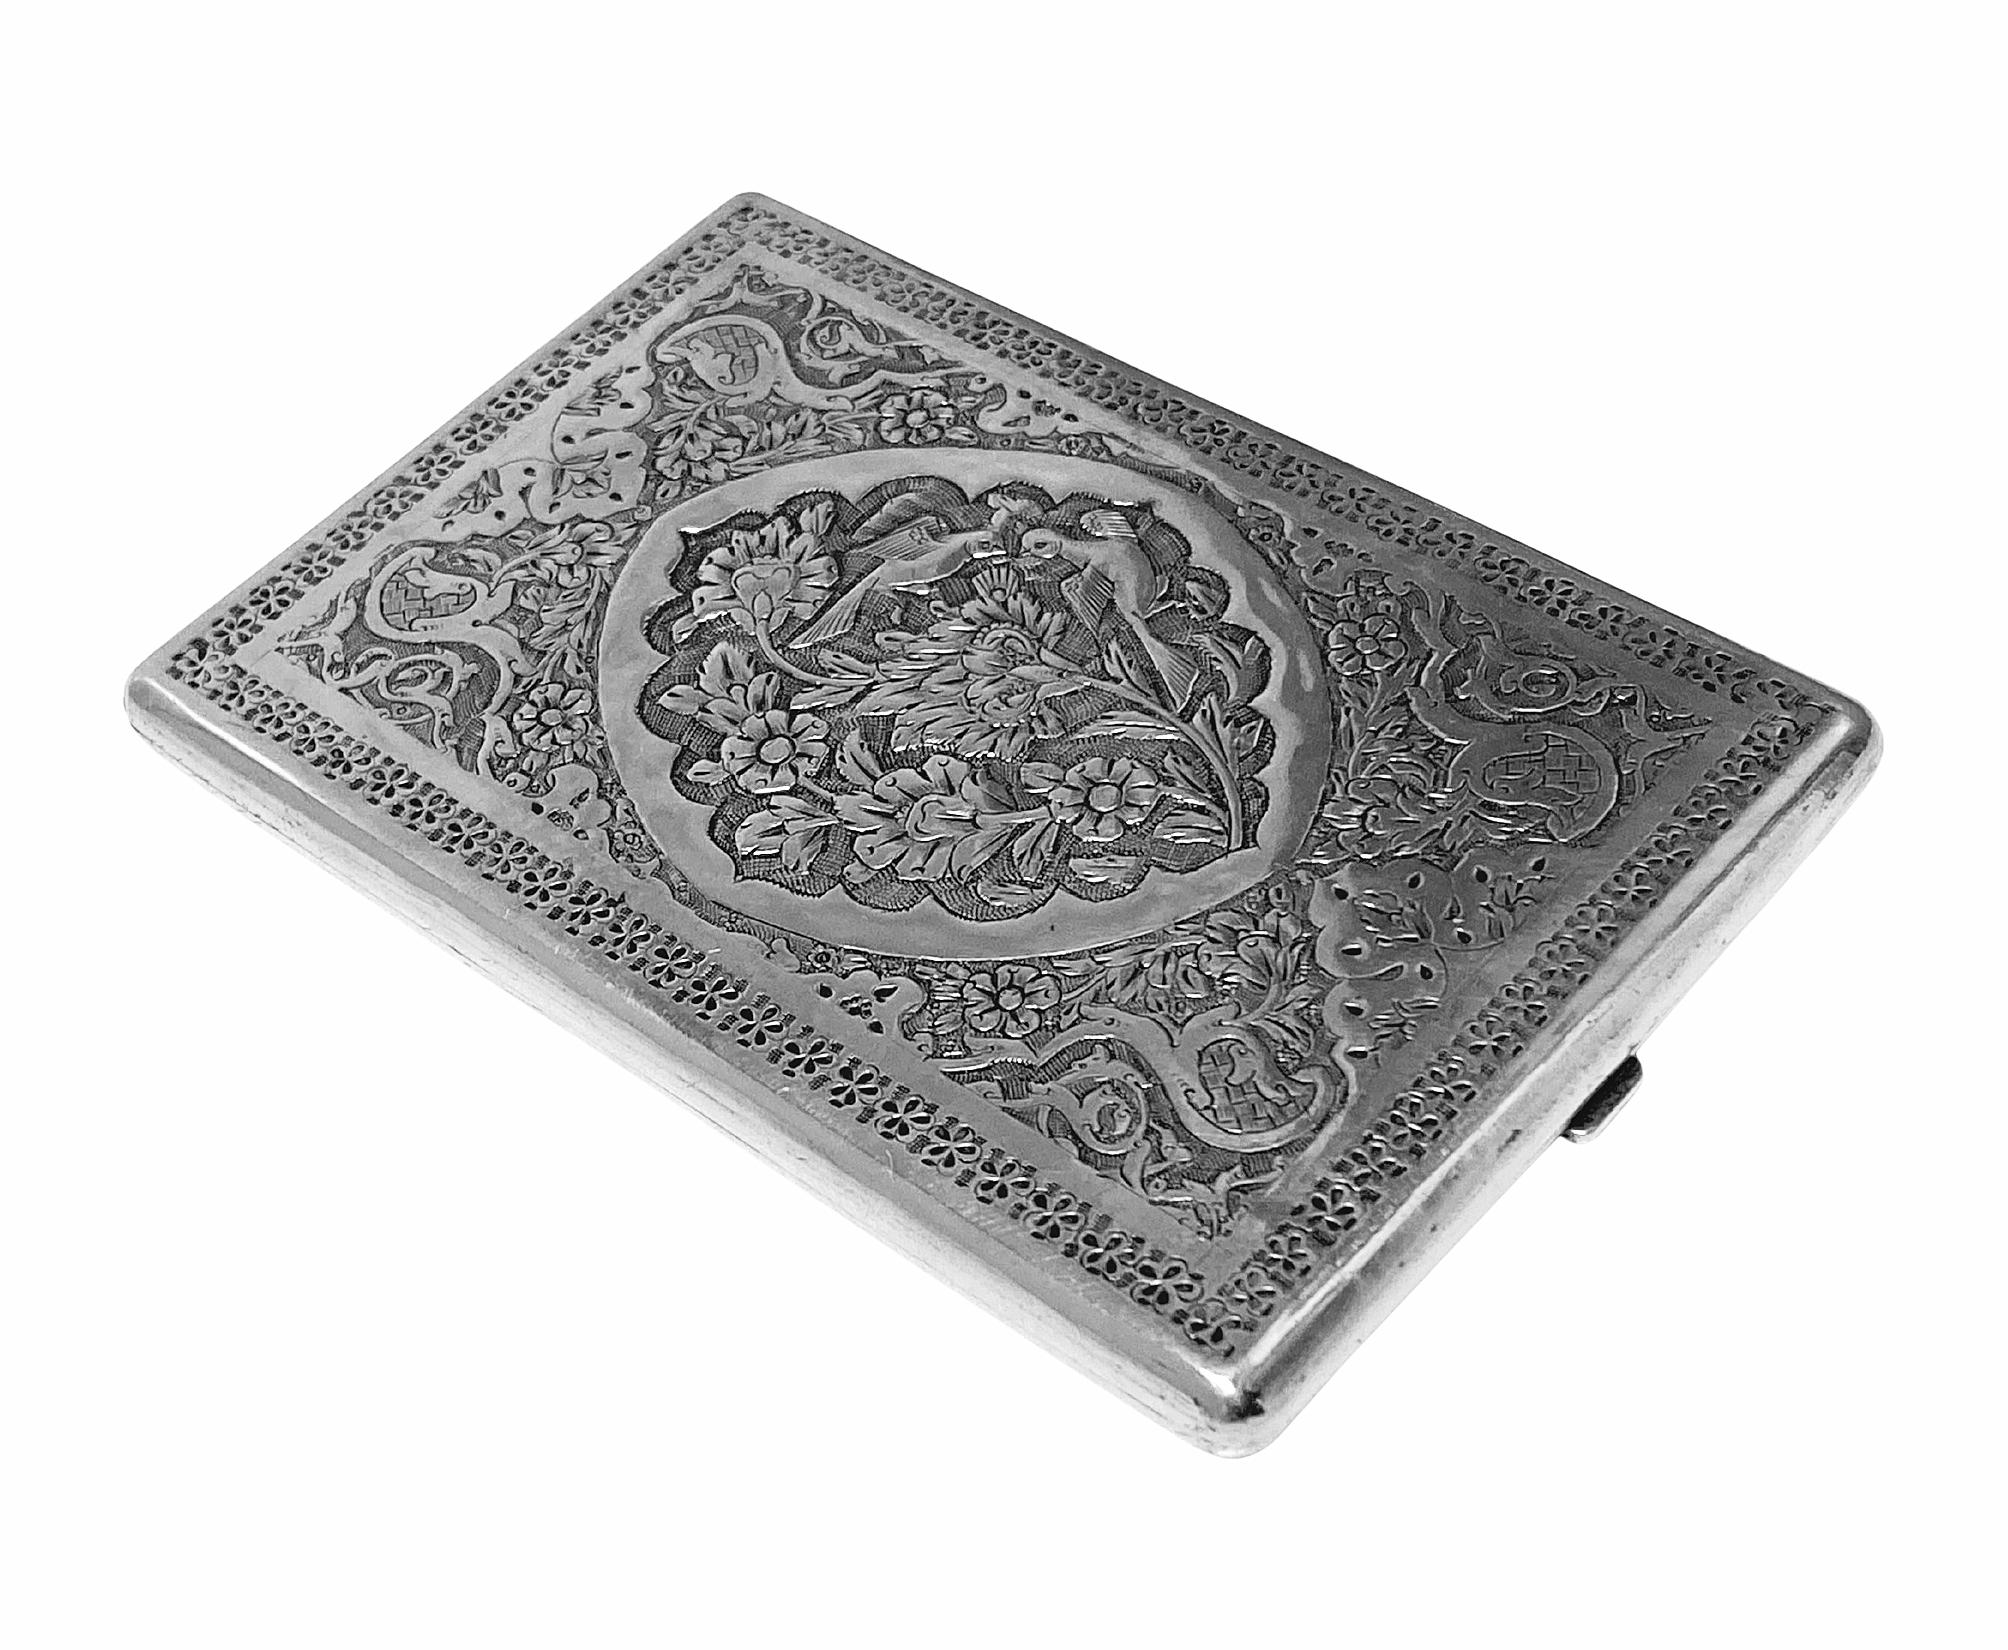 Other Antique Persian solid silver cigarette case C.1900